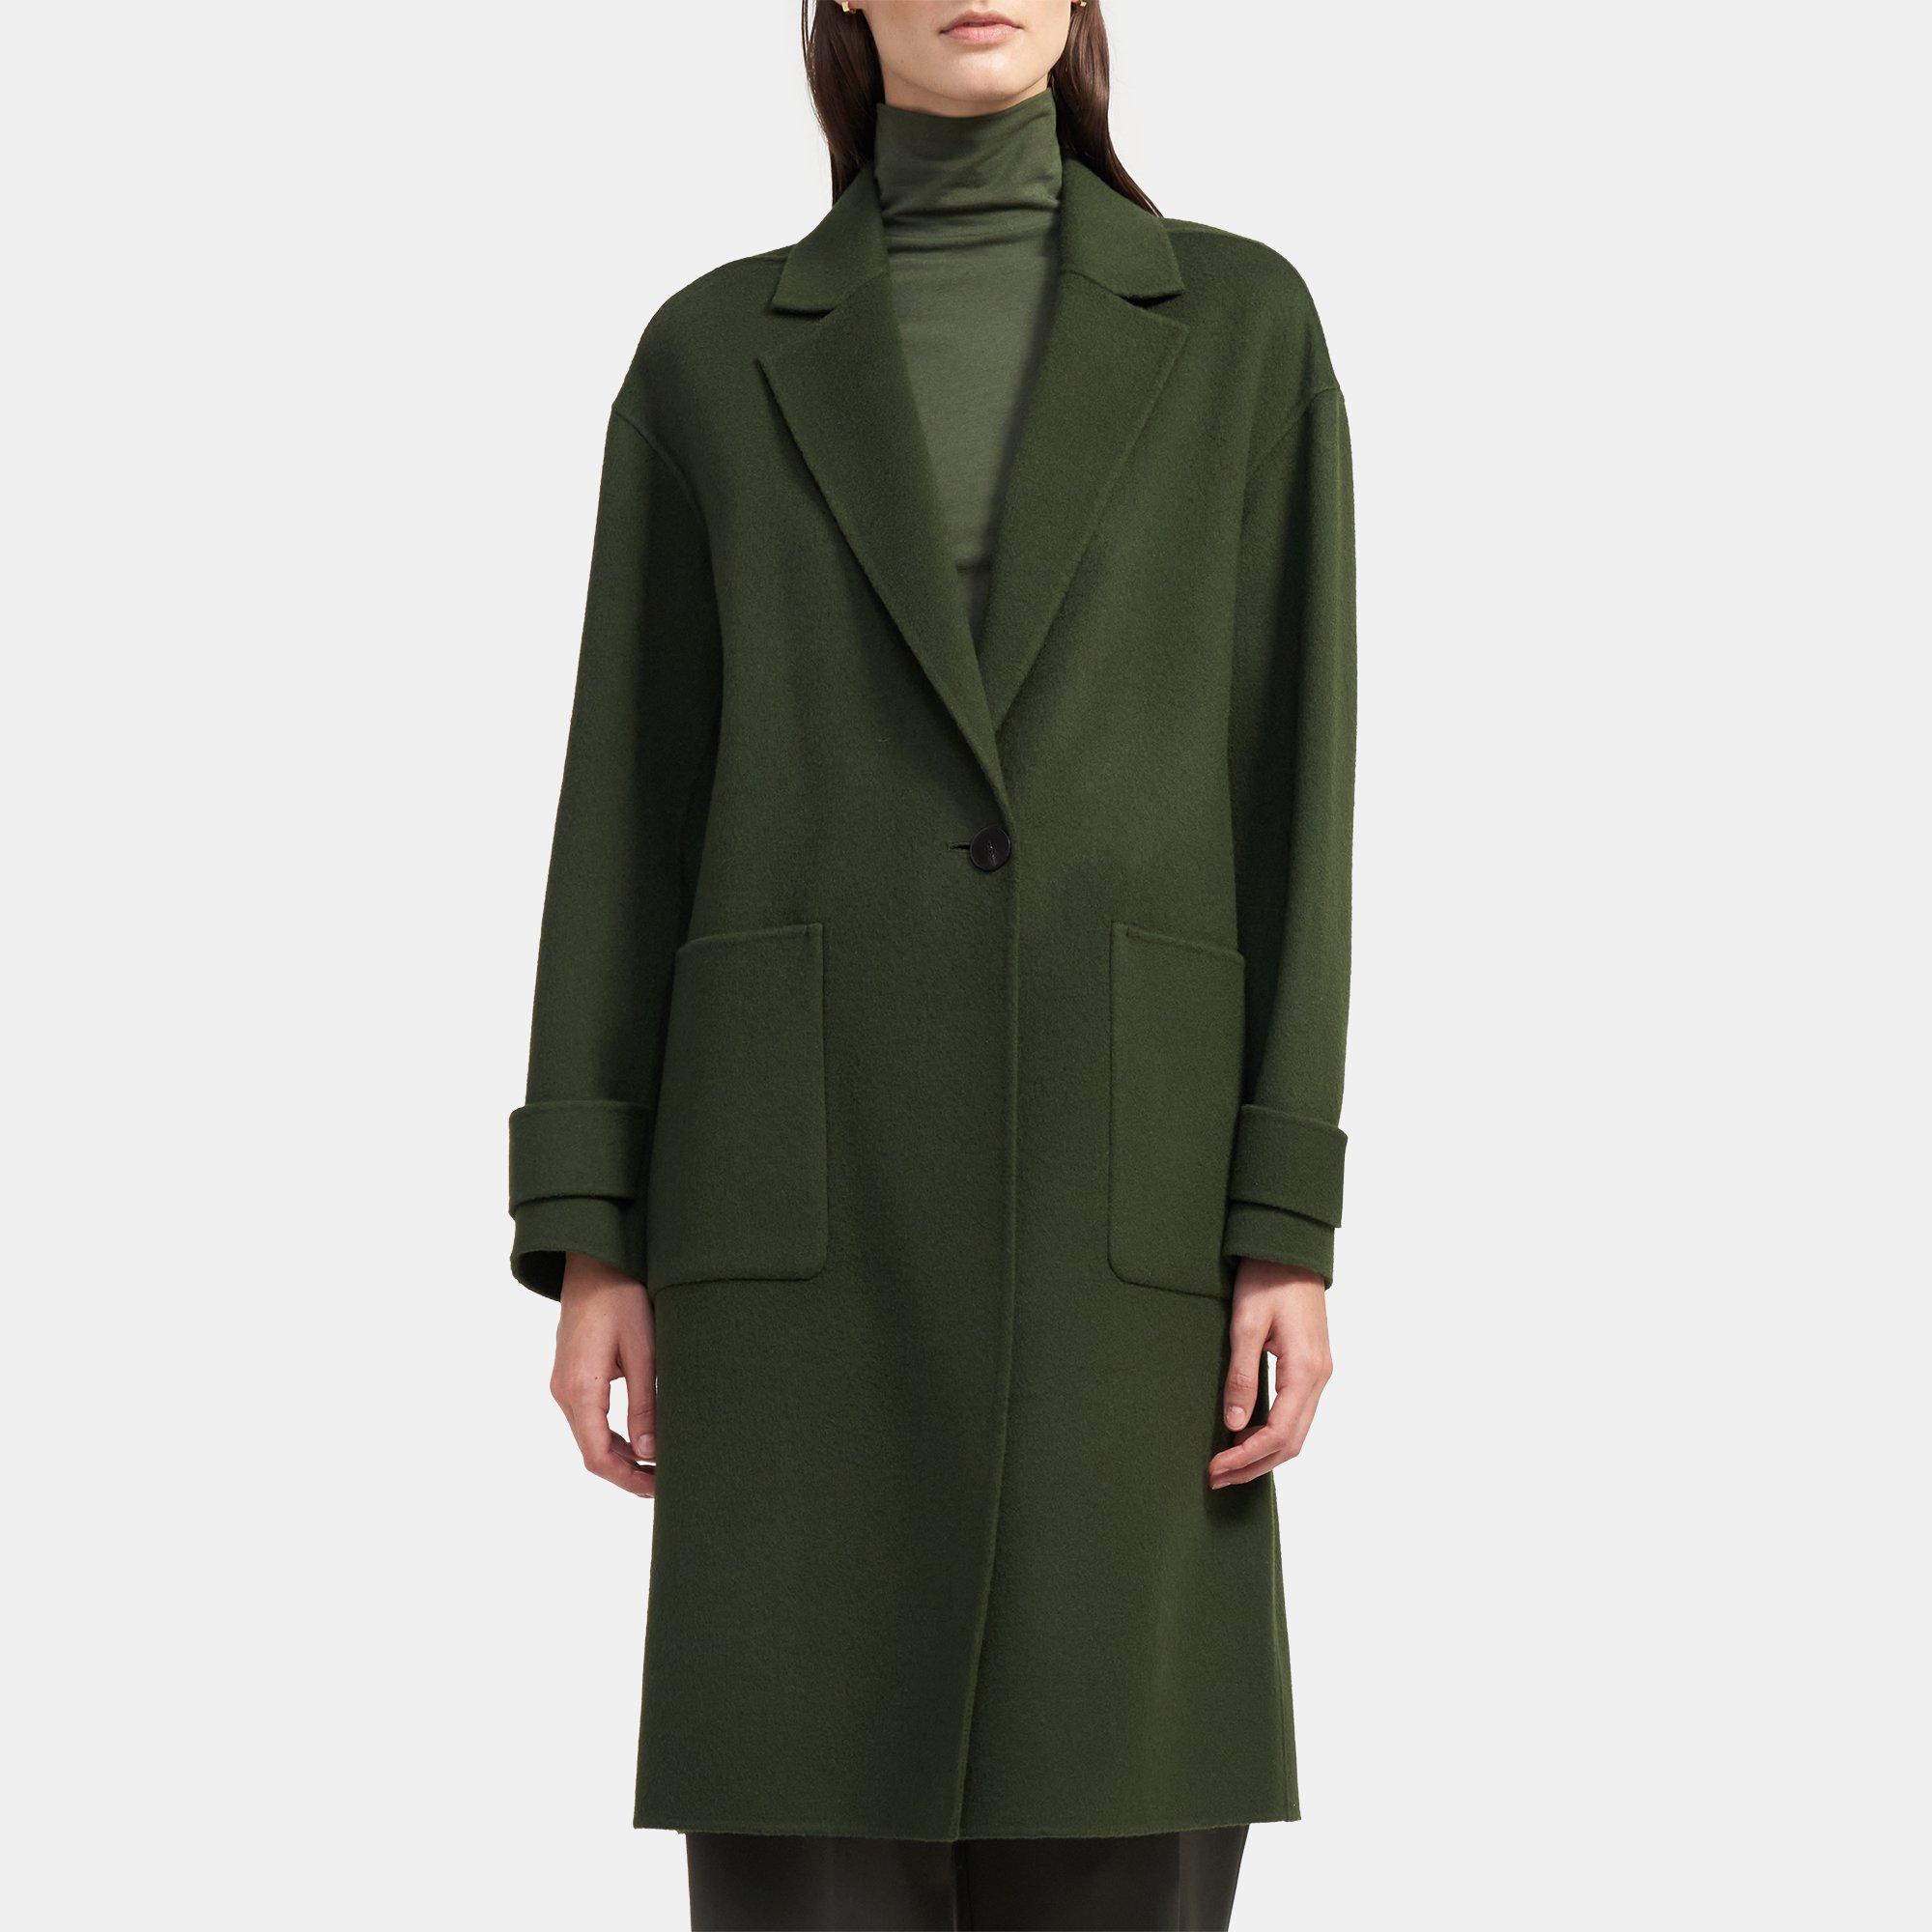 EASY ONE BUTTON COAT | Theory Outlet